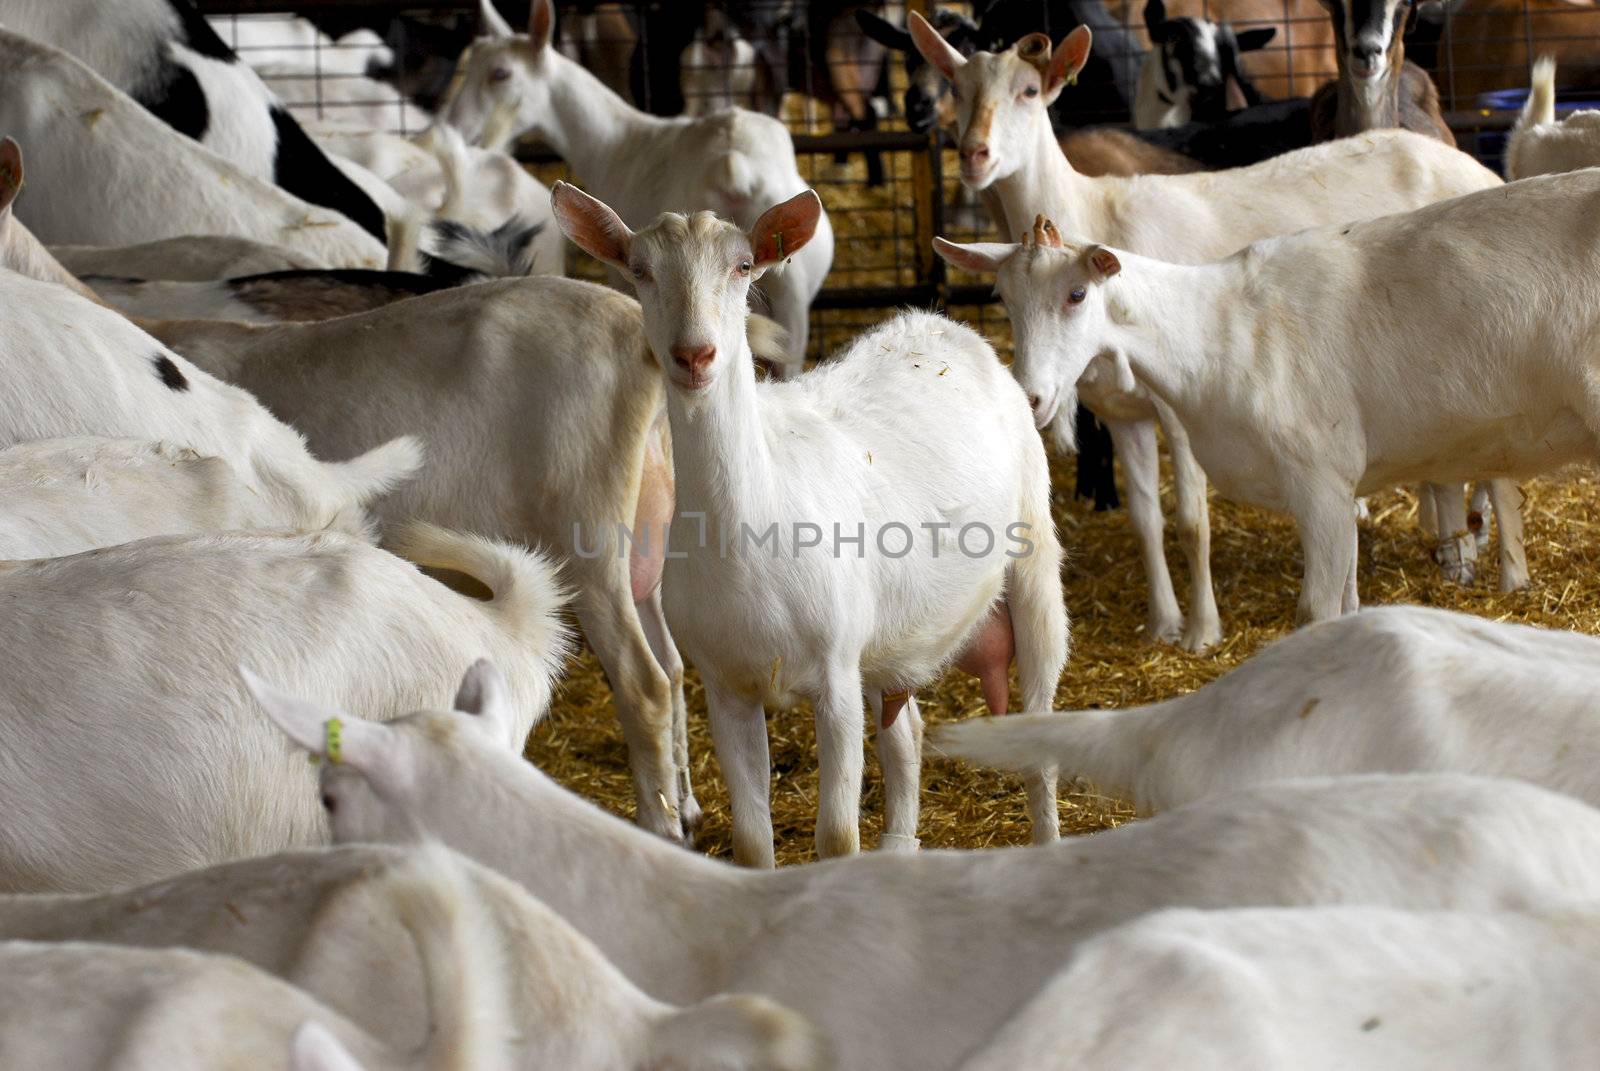 herd of dairy goat in a barn - purebred saanen and nubian